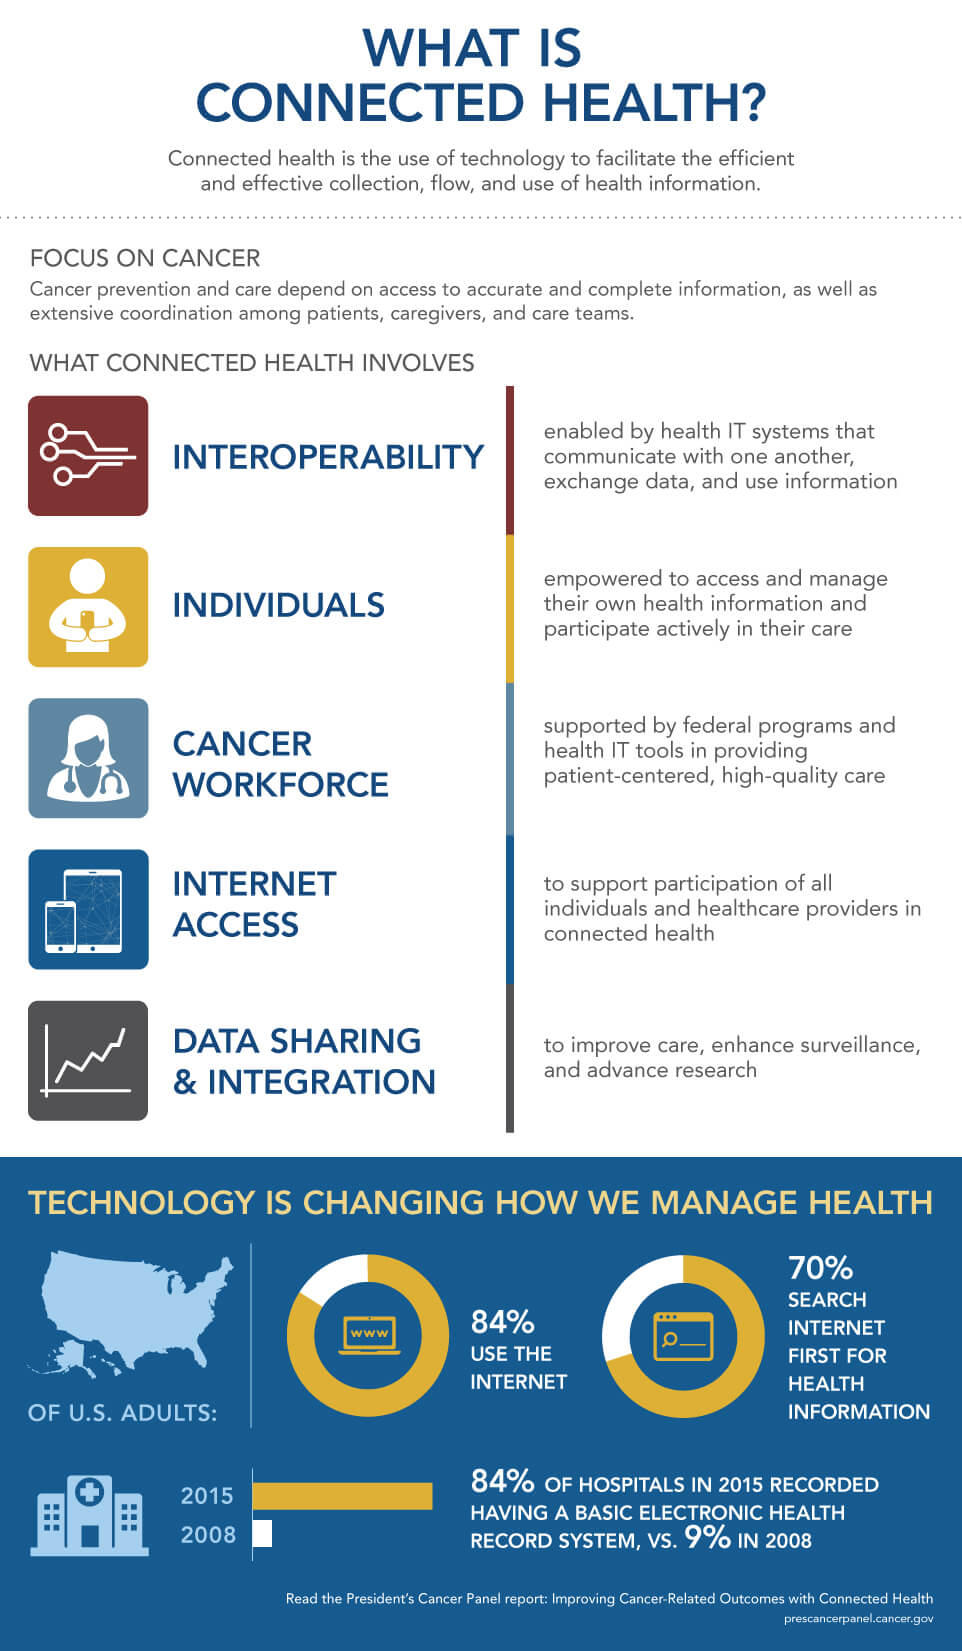 Connected health is the use of technology to facilitate the efficient and effective collection, flow, and use of health information. Connected Health involves: Interoperability; Individuals; Cancer Workforce; Internet Access; and Data Sharing & Integration.